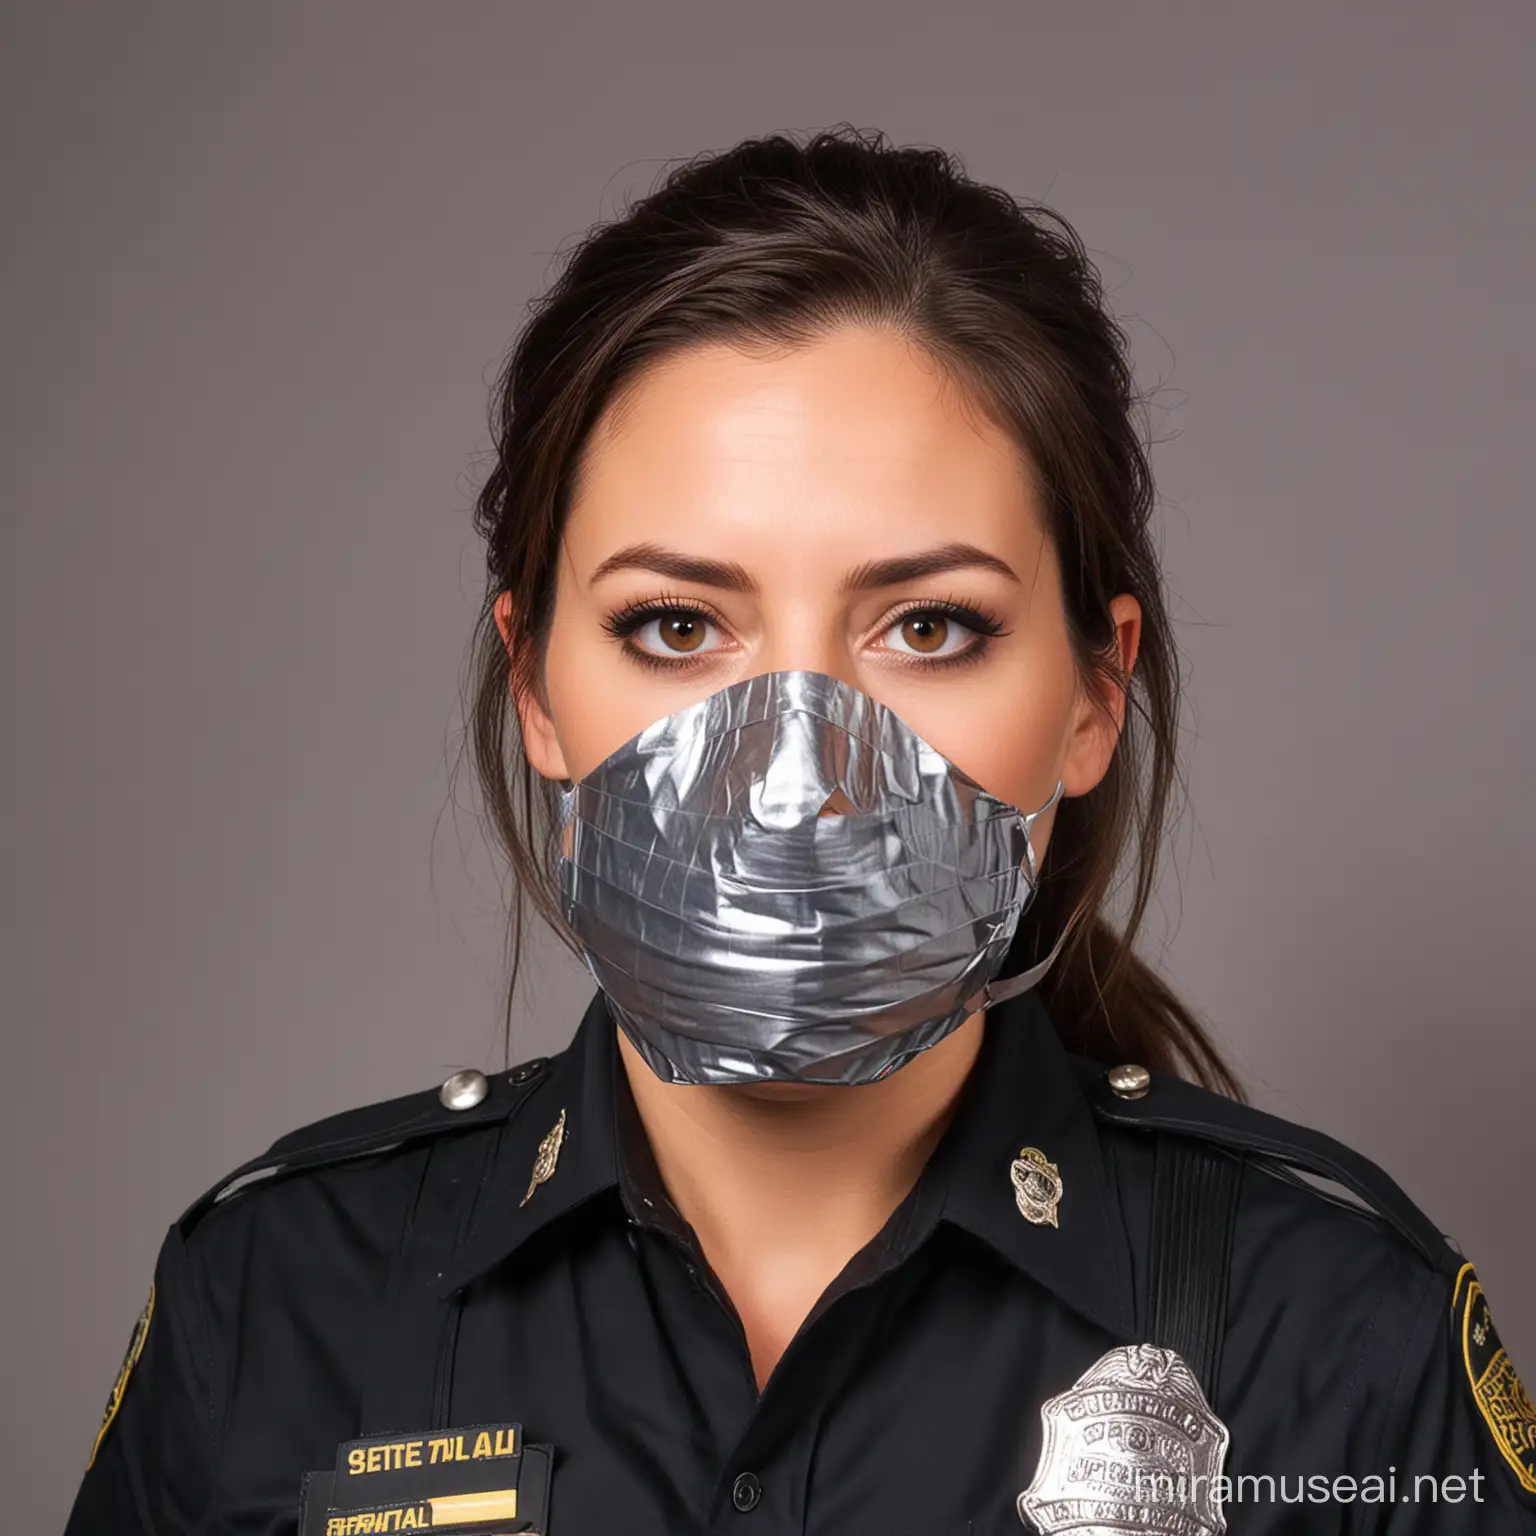 Silenced Female Police Officer with Duct Tape Gag